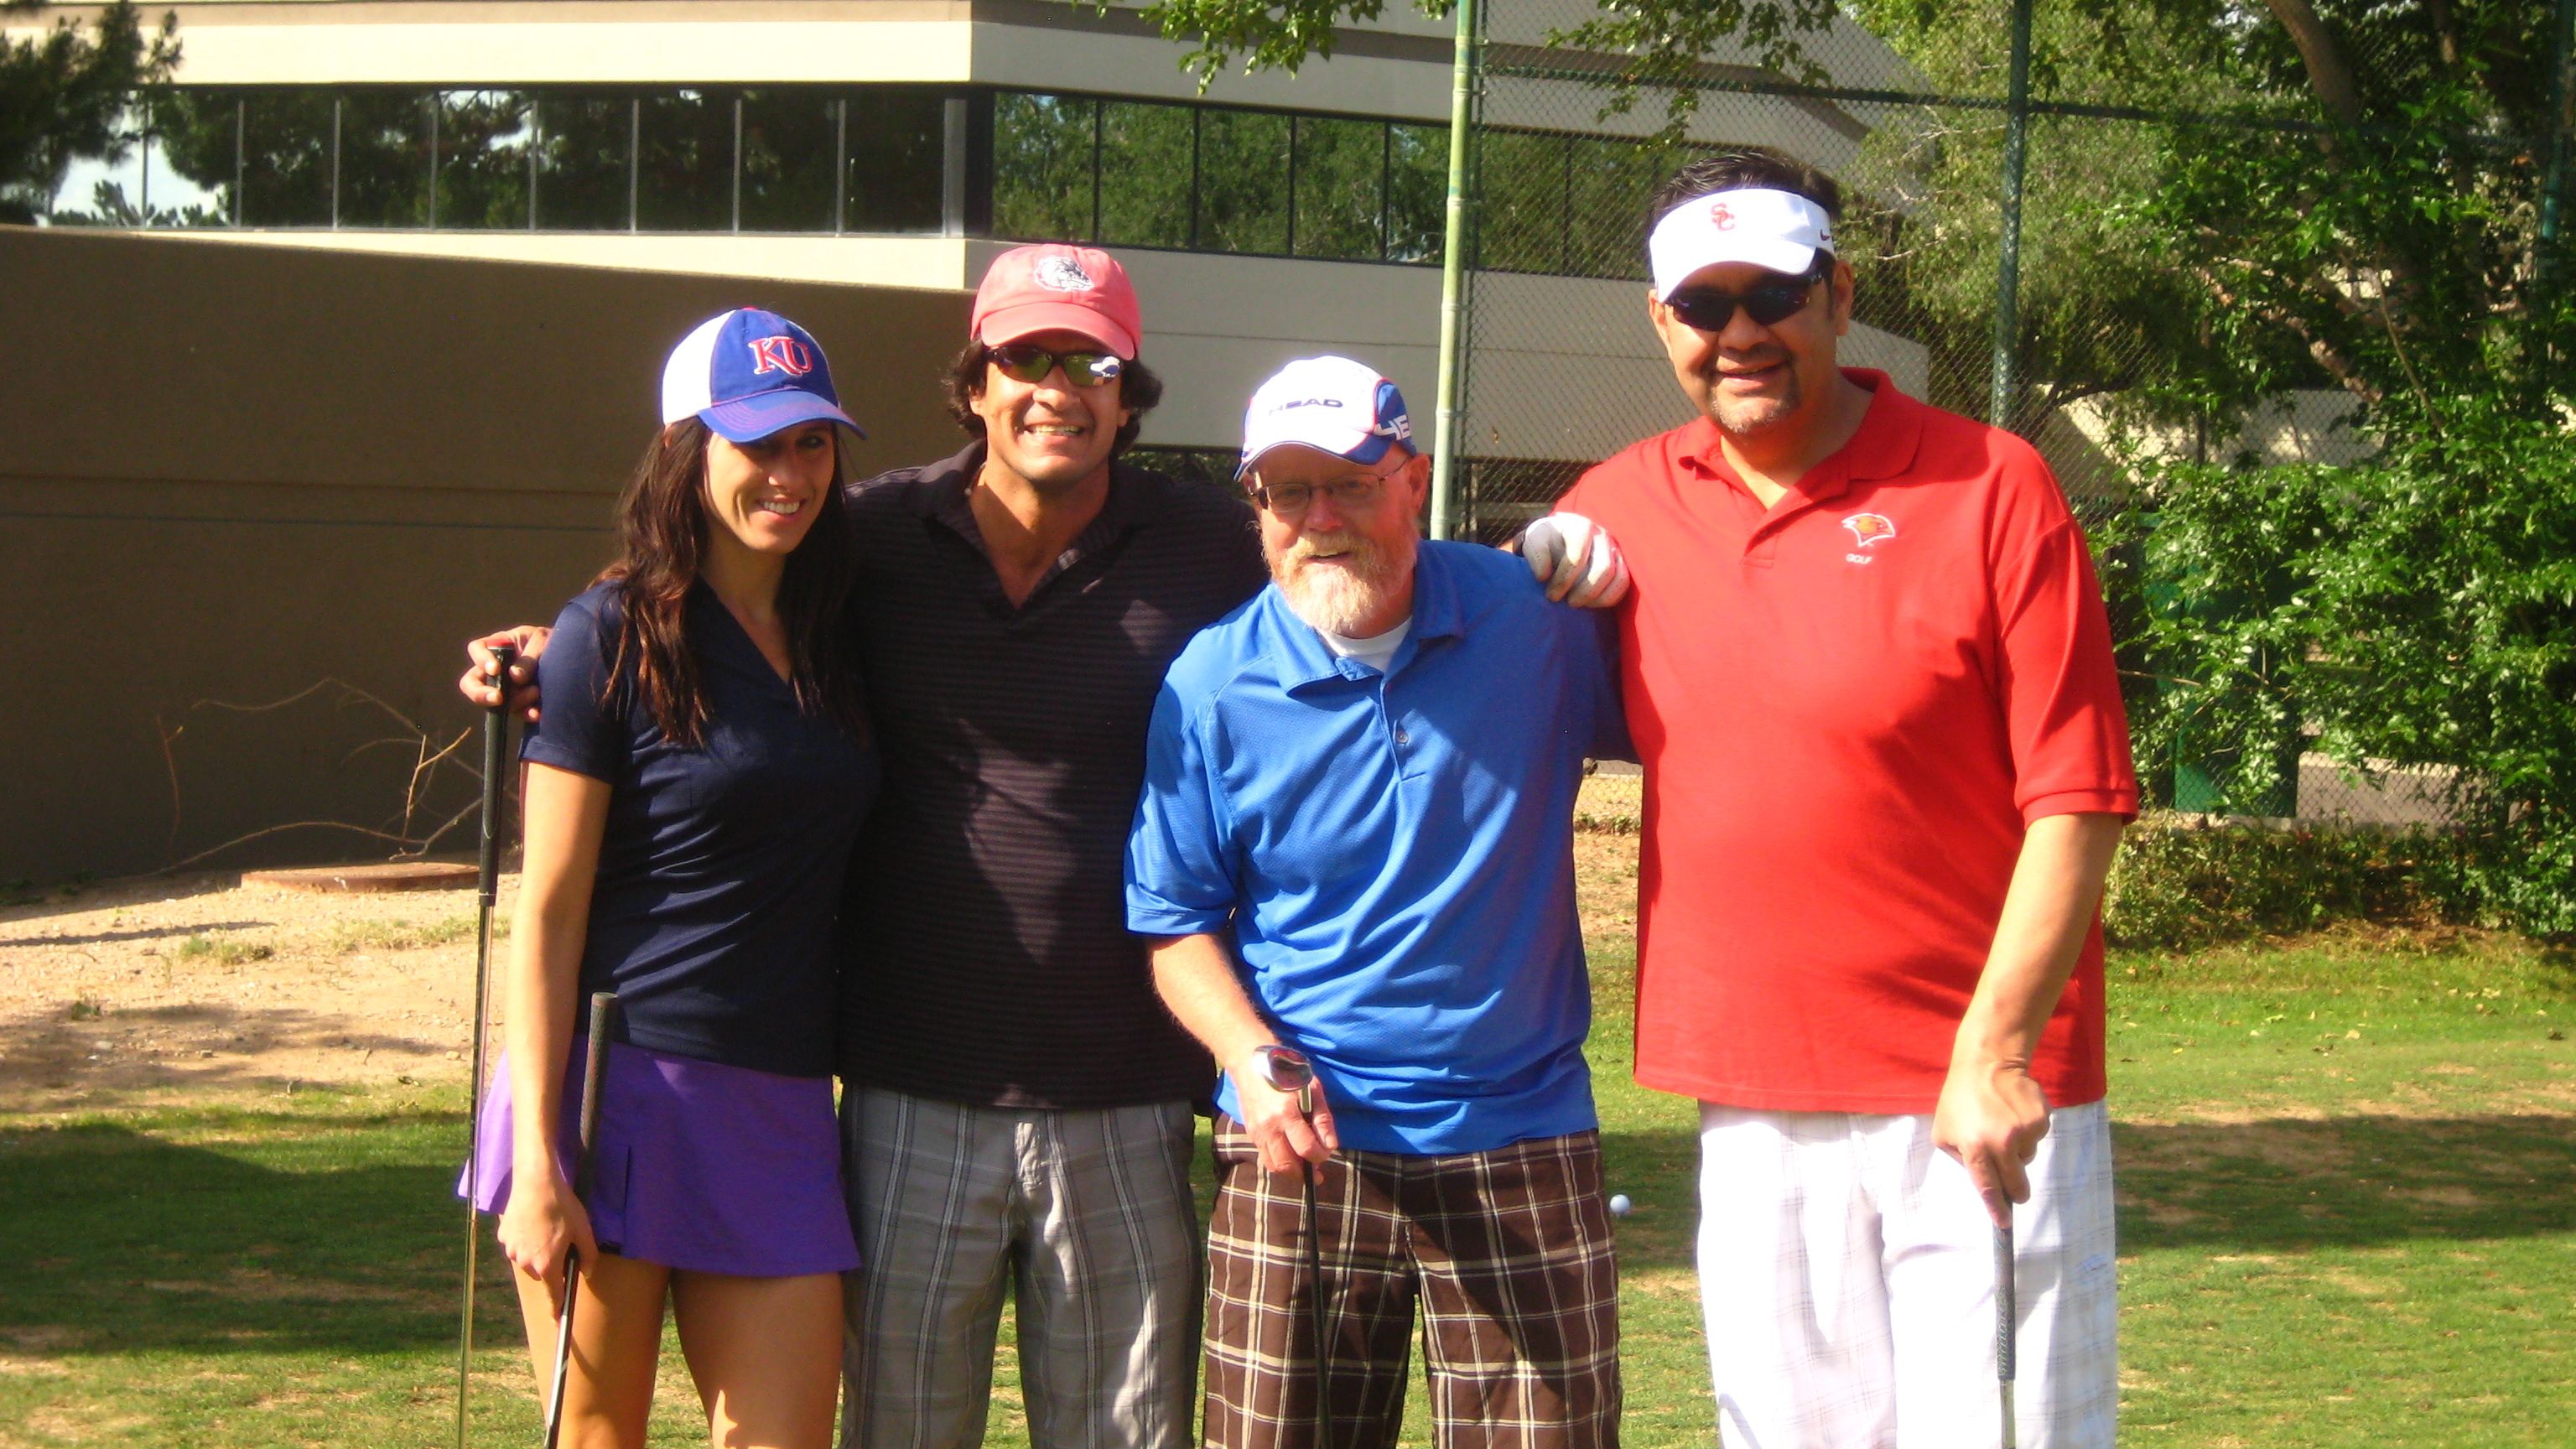 Core Consulting Group Inc., sponsored the “Margarita Hole” at the AADC 21st Annual Barry Fish Memorial Golf Tournament.